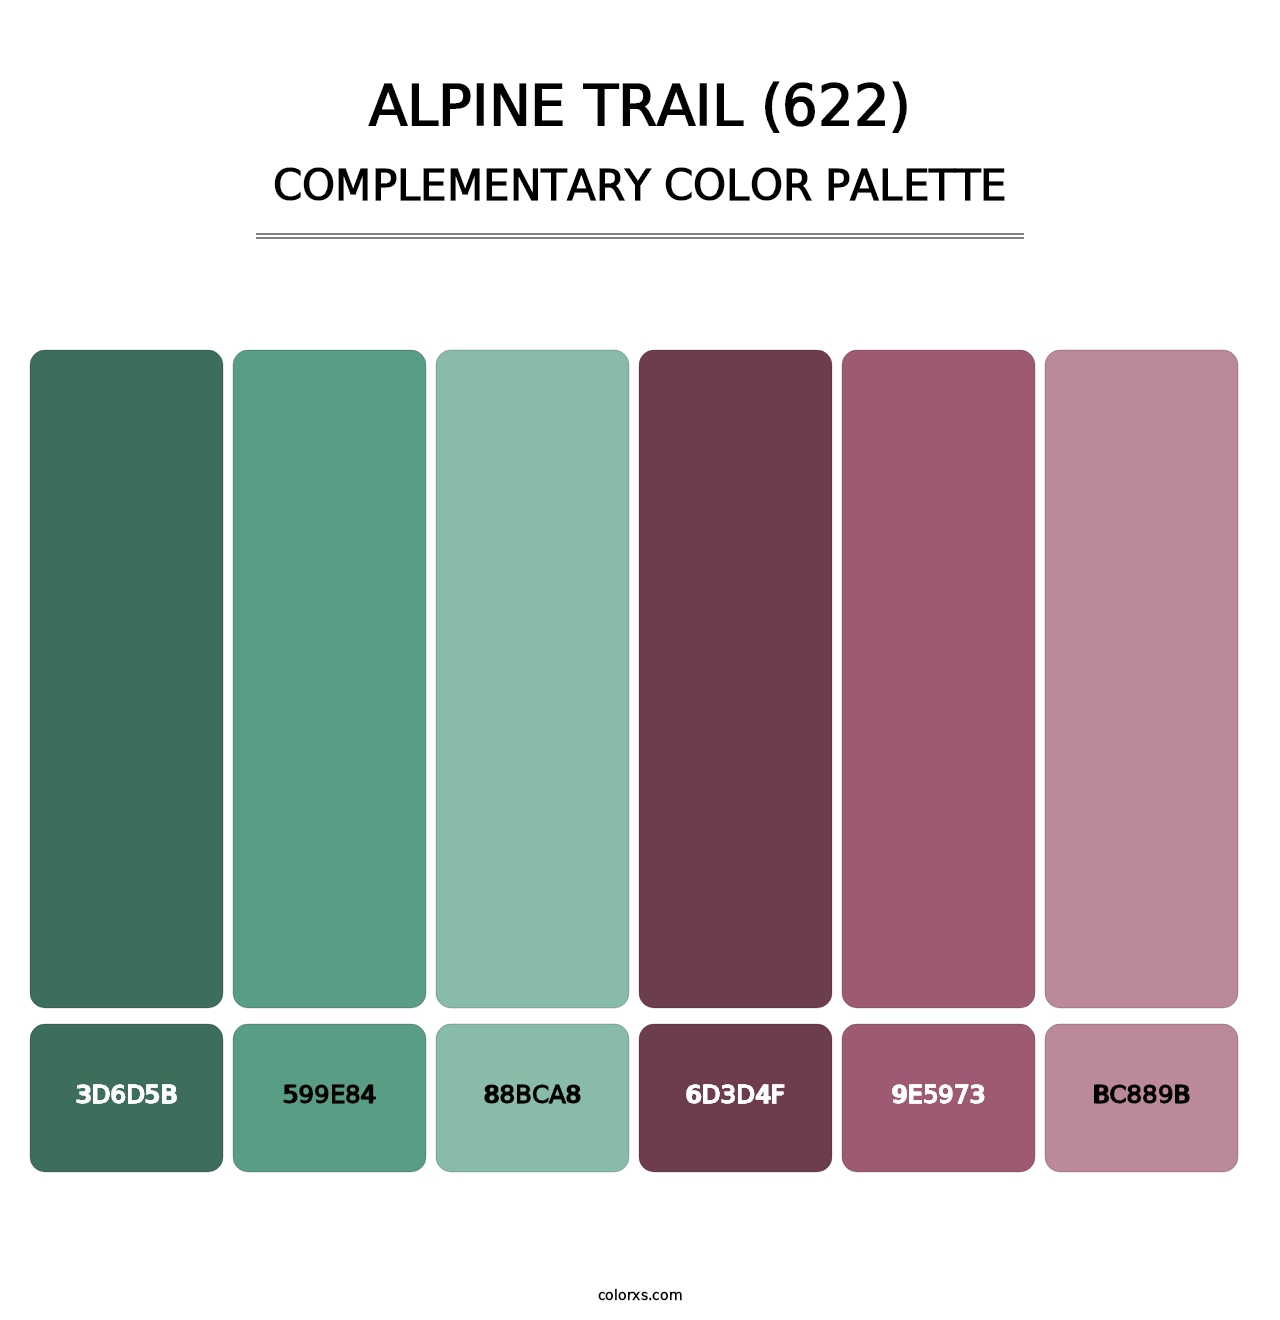 Alpine Trail (622) - Complementary Color Palette